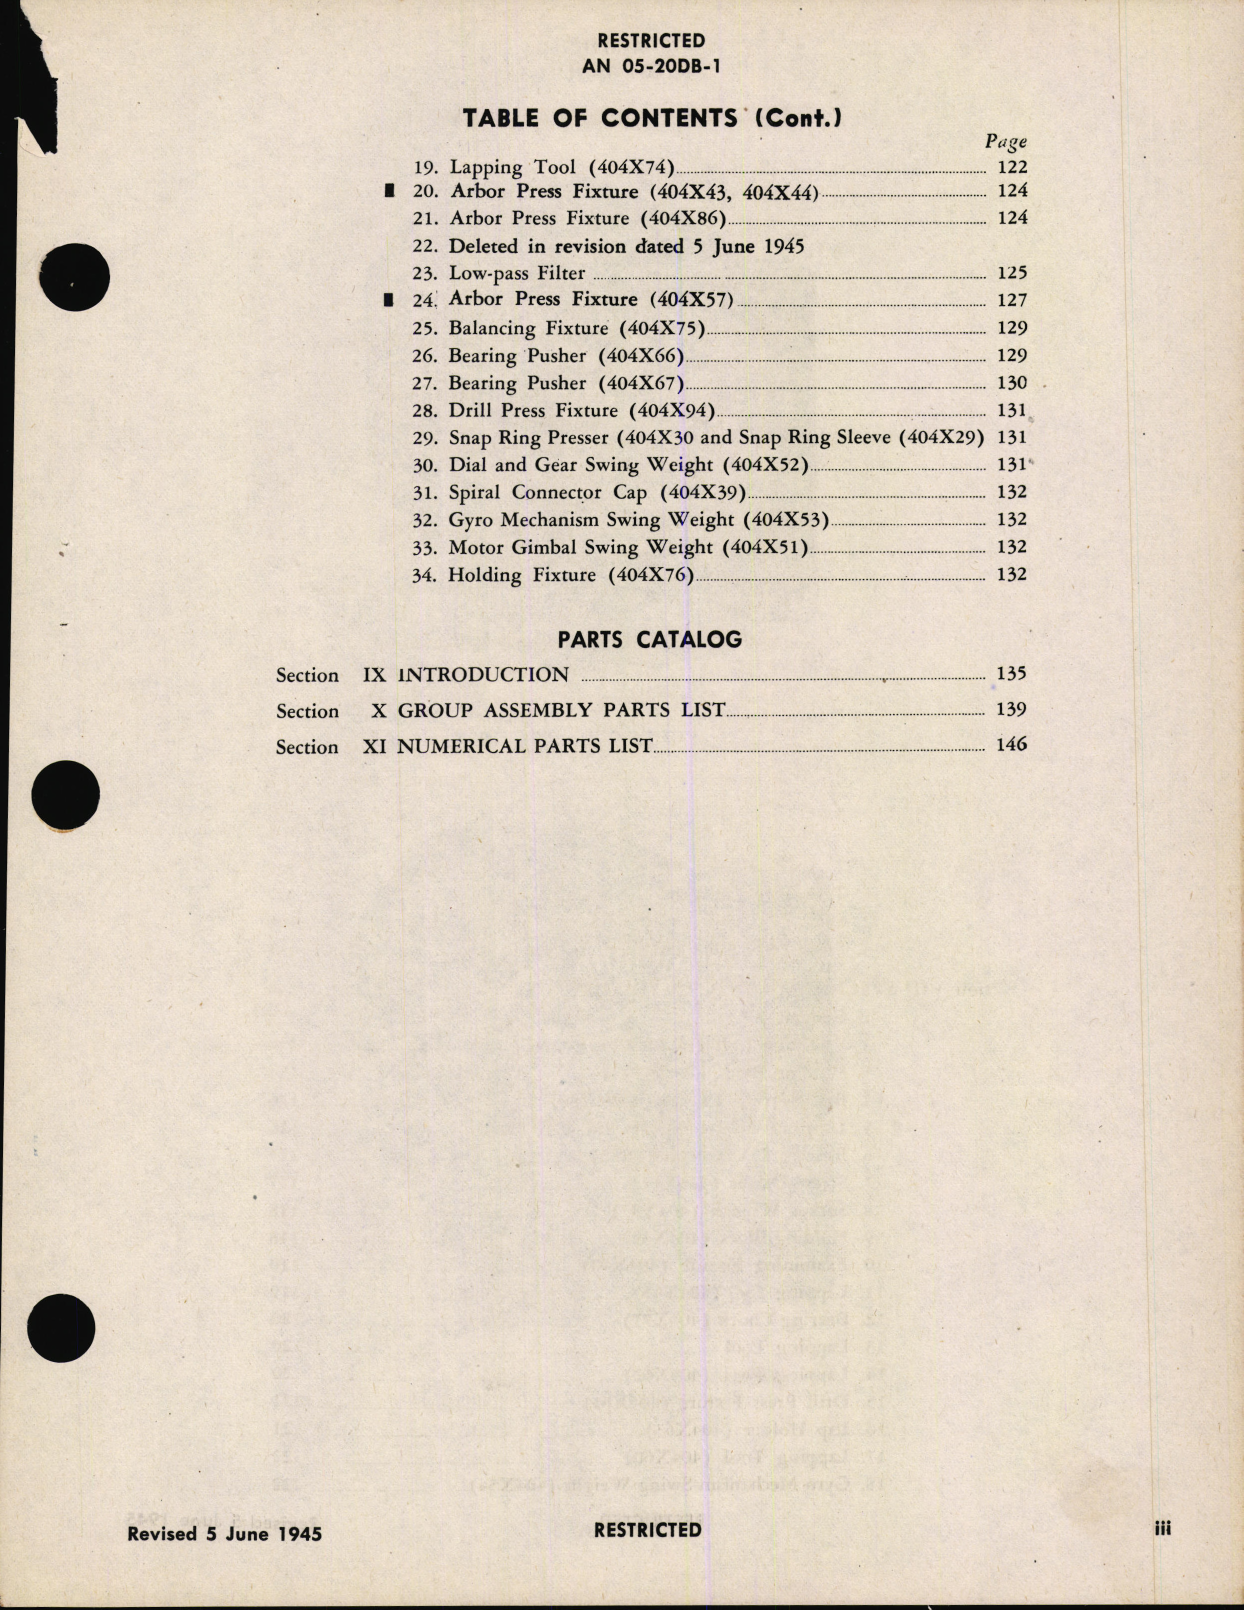 Sample page 5 from AirCorps Library document: Operation, Service & Overhaul Inst with Parts Catalog for Directional Gyro Turn Indicator Type C-1 F.S.S.C. No. 88-I-1005